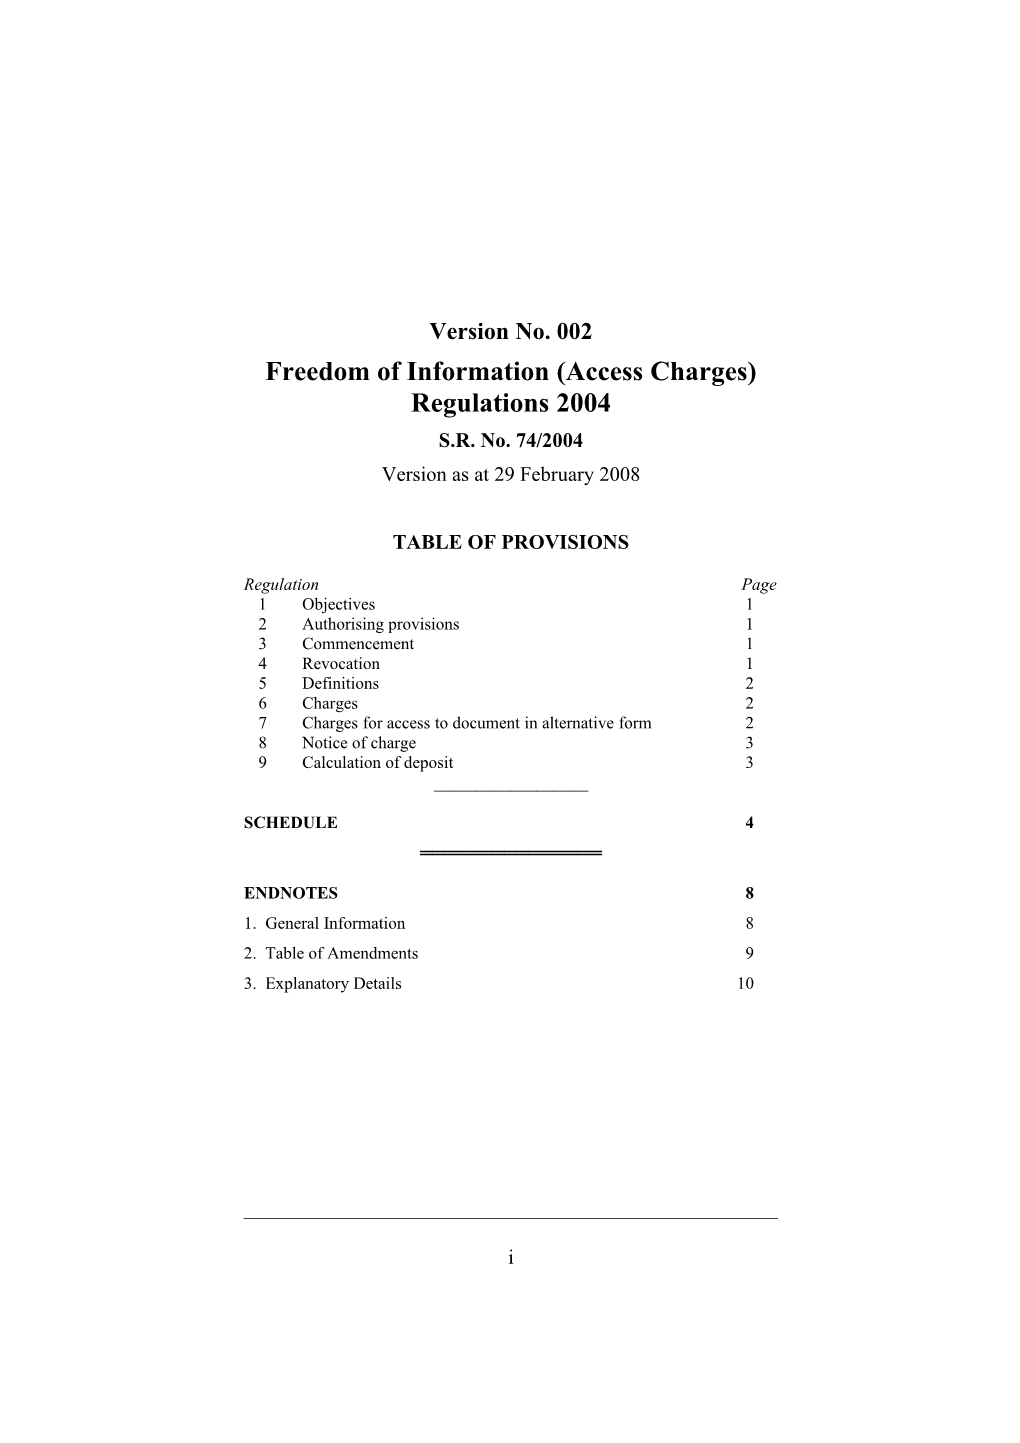 Freedom of Information (Access Charges) Regulations 2004